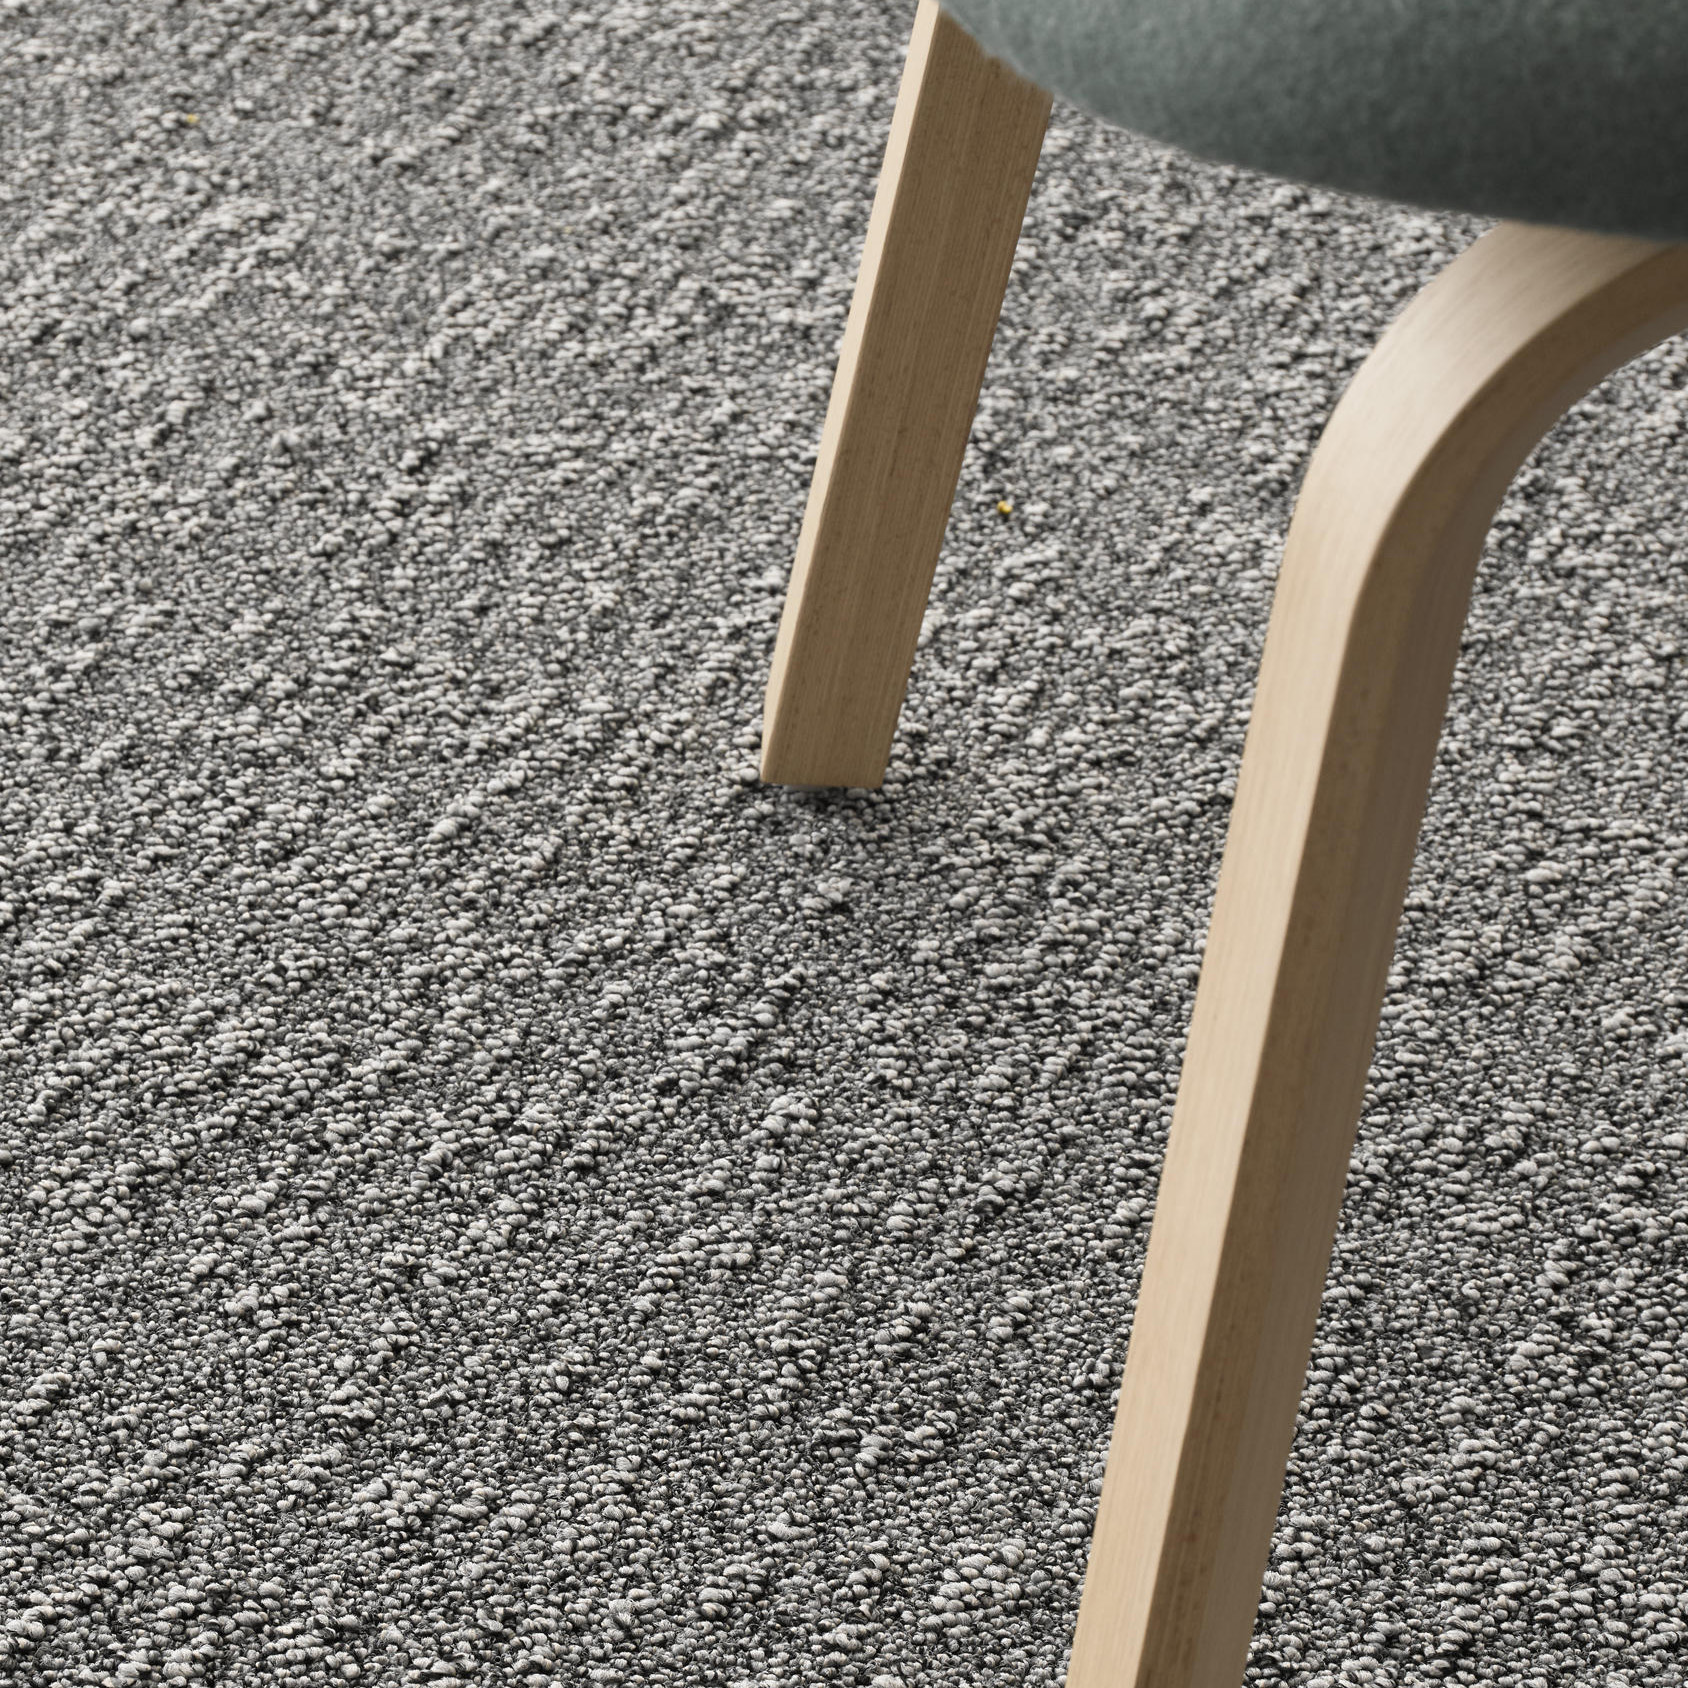 Desso Airmaster Earth Carpet Tile with chair peg